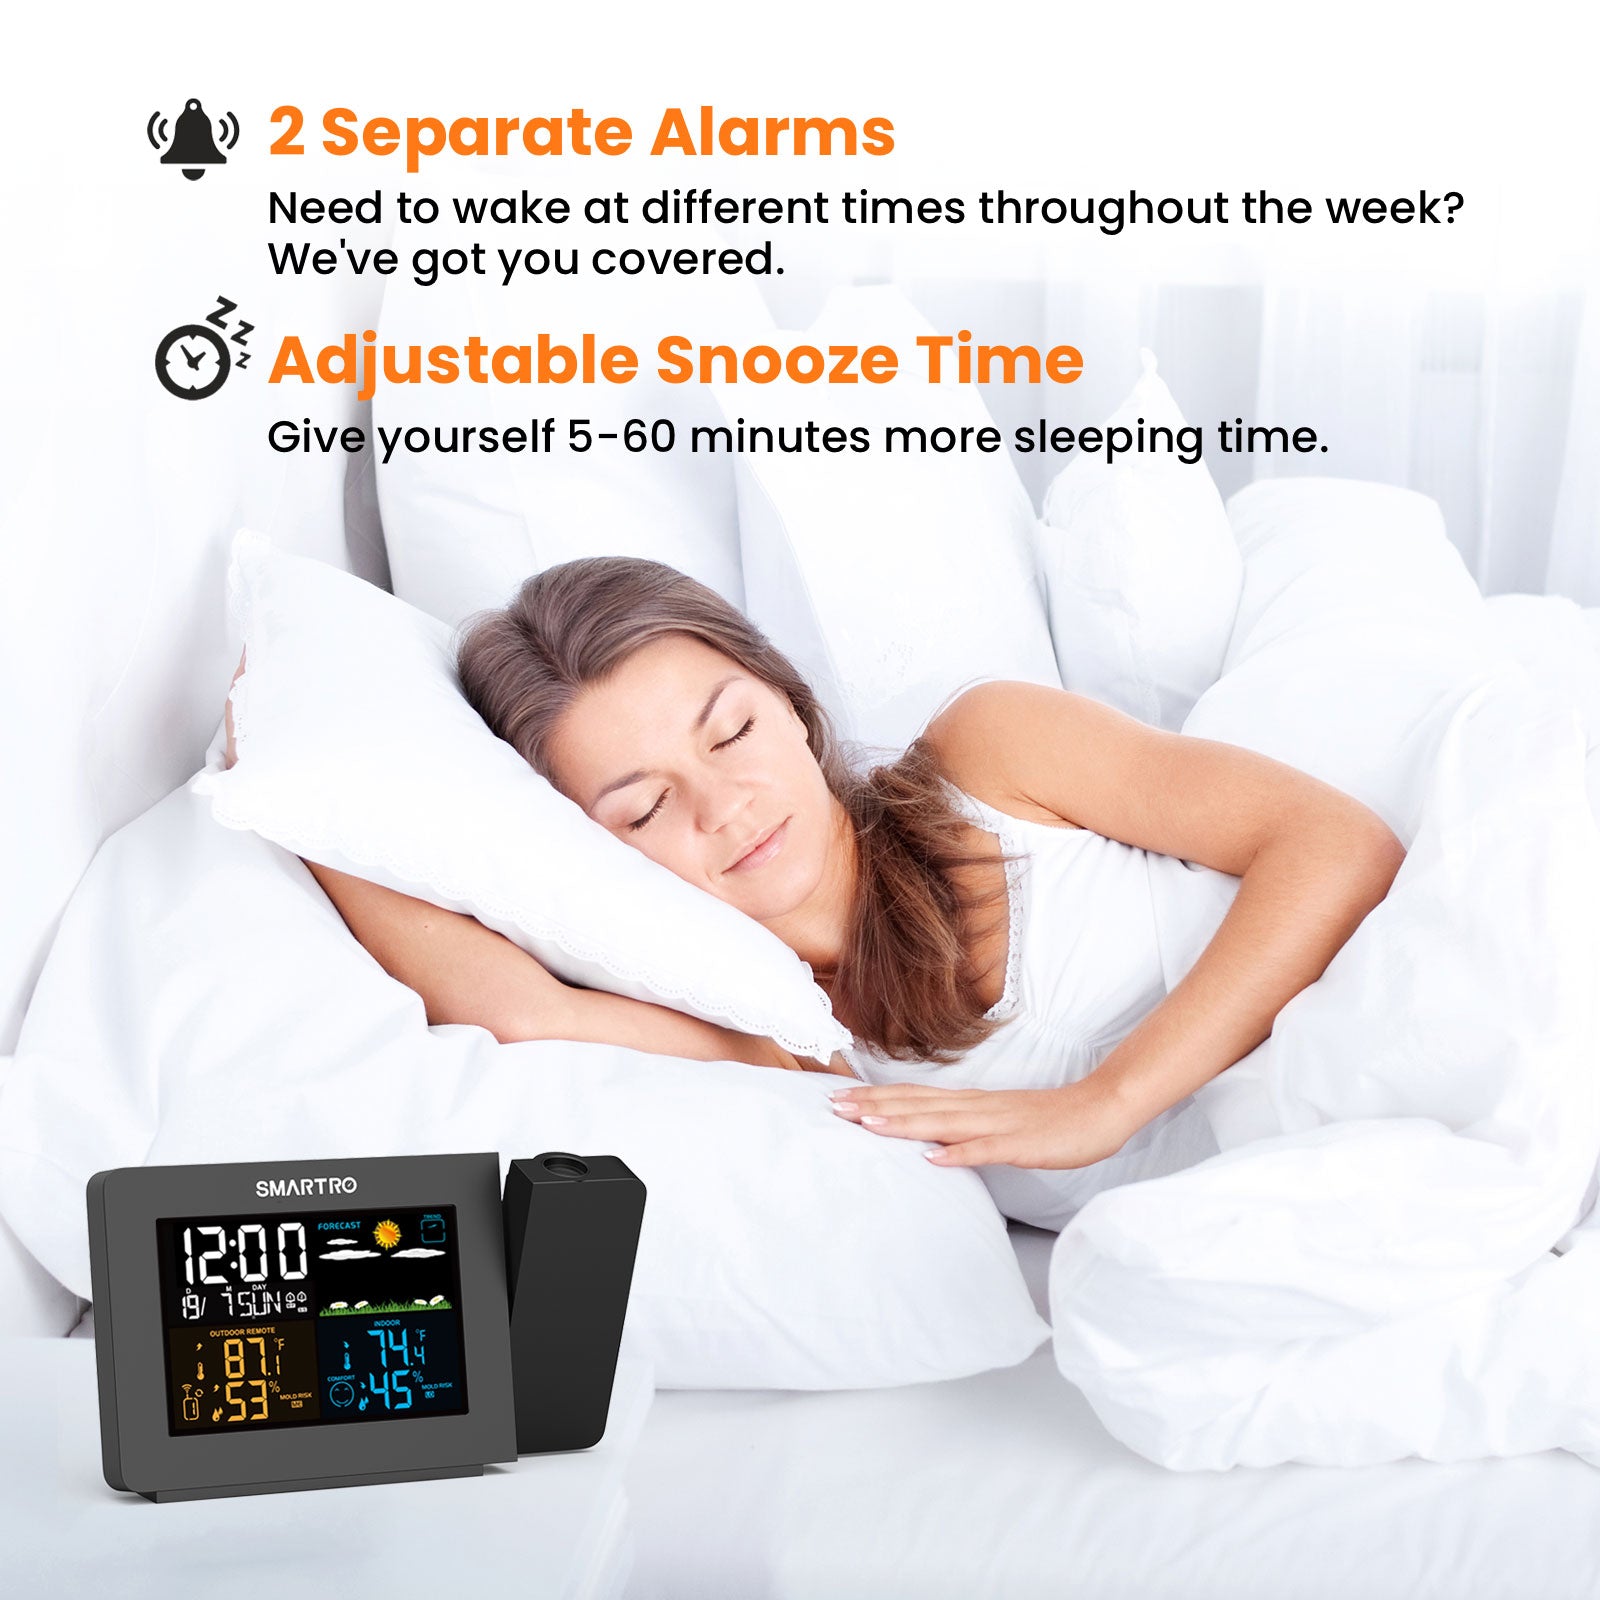 Smartro SC91 Projection Alarm Clock for Bedrooms with Weather Station